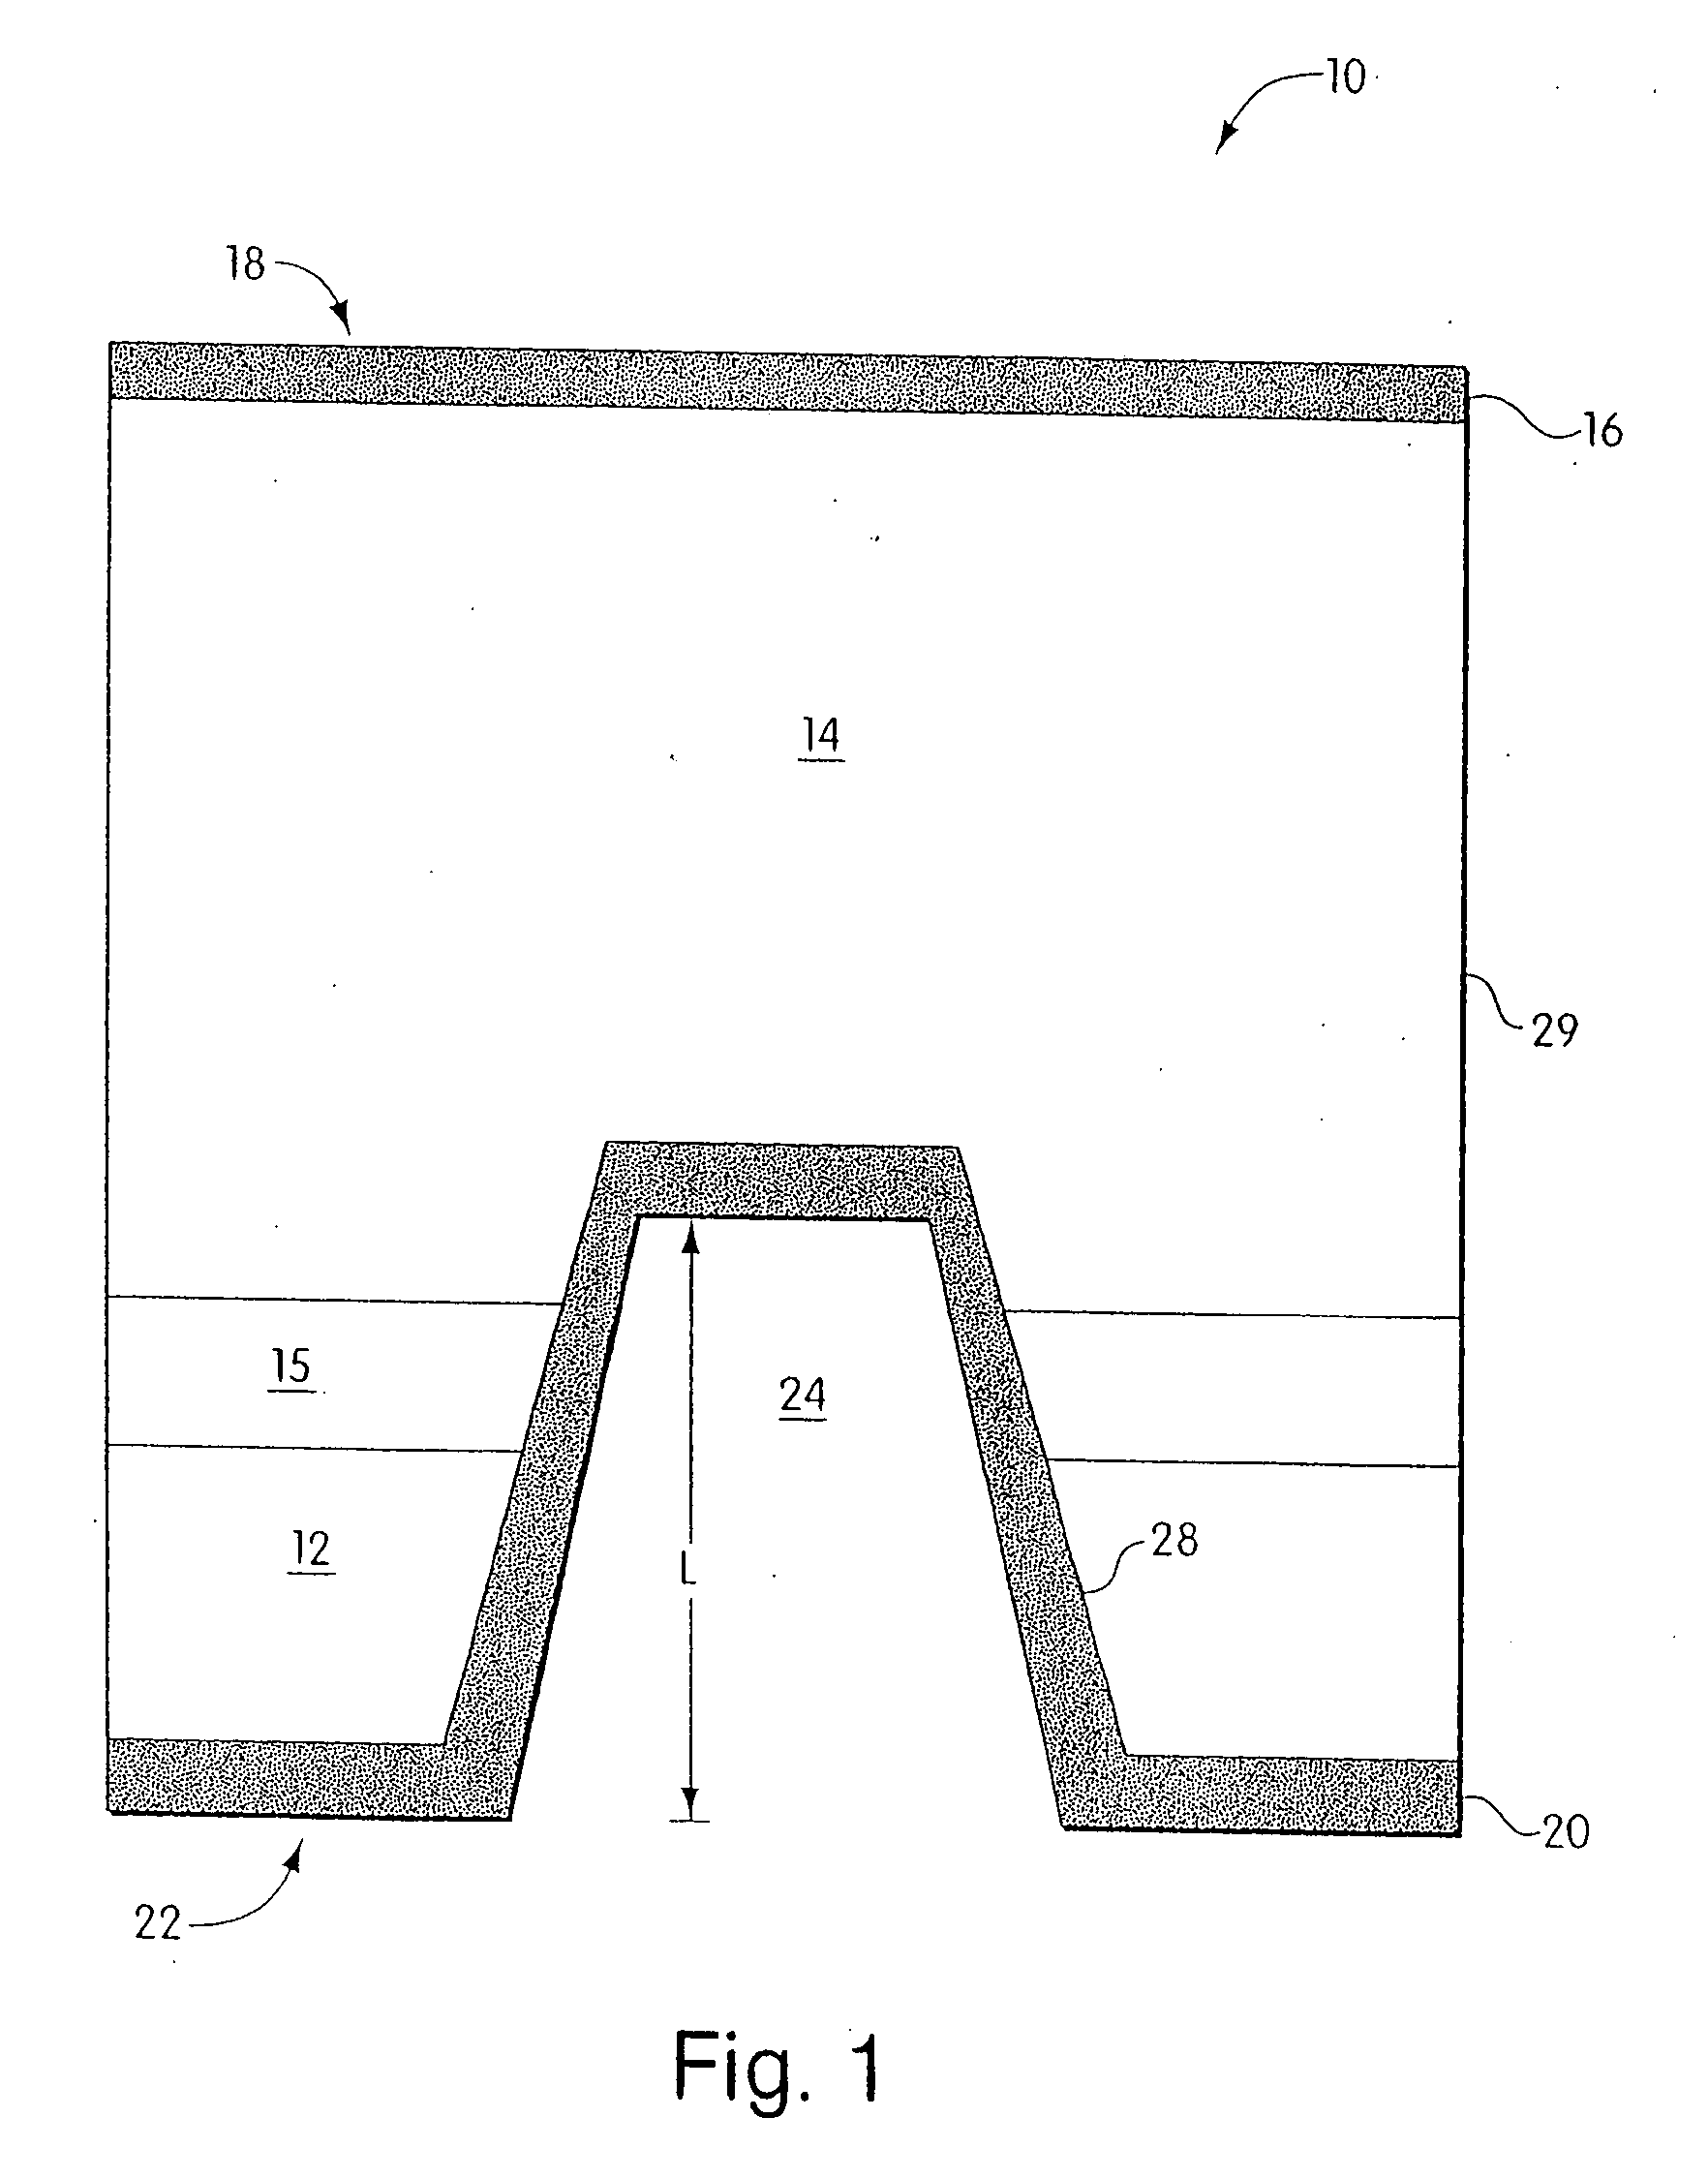 Gallium nitride material devices and methods of forming the same